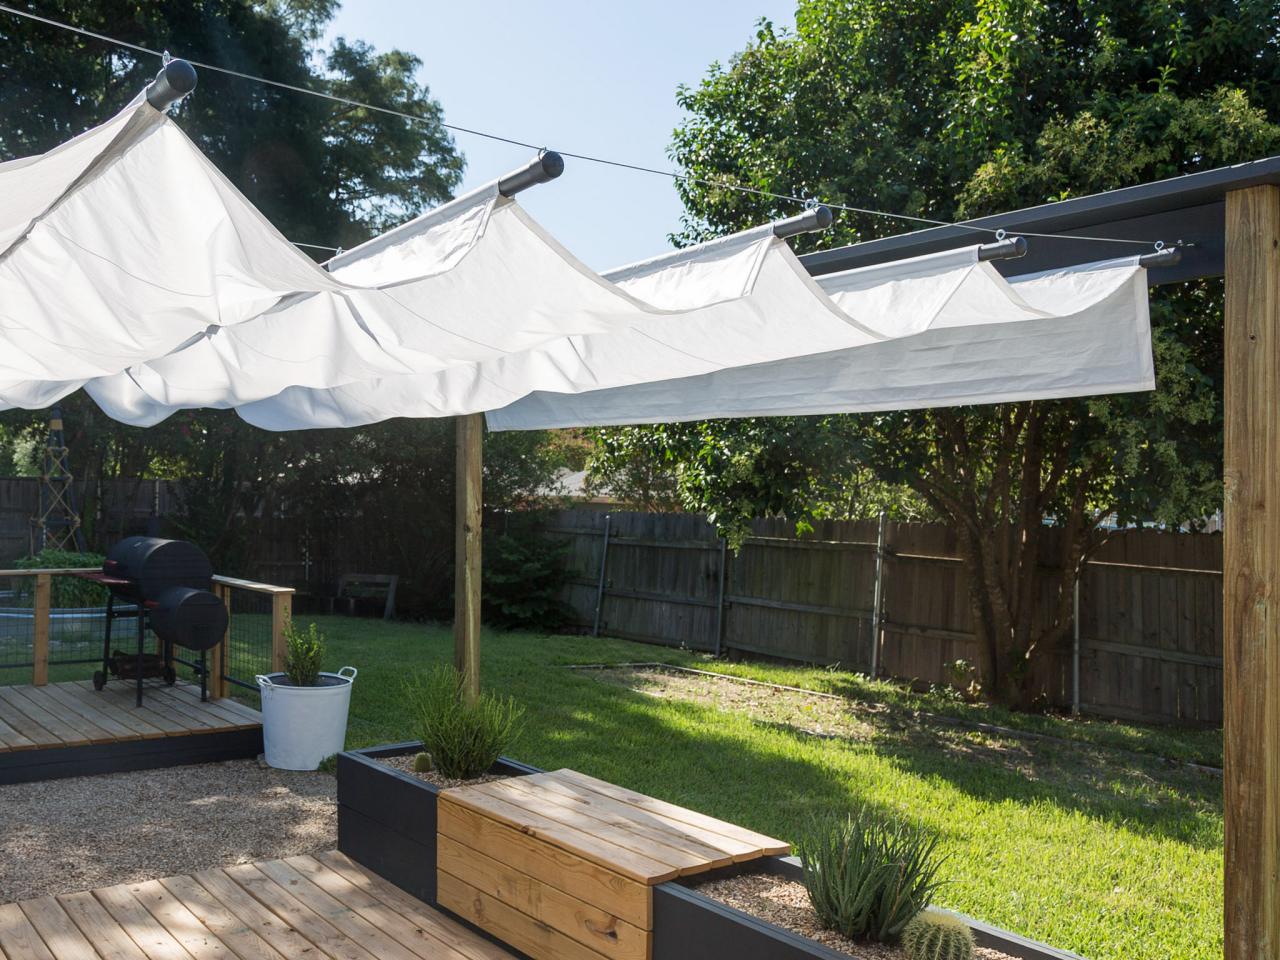 How To Build An Outdoor Canopy, Do It Yourself Outdoor Canopy Ideas